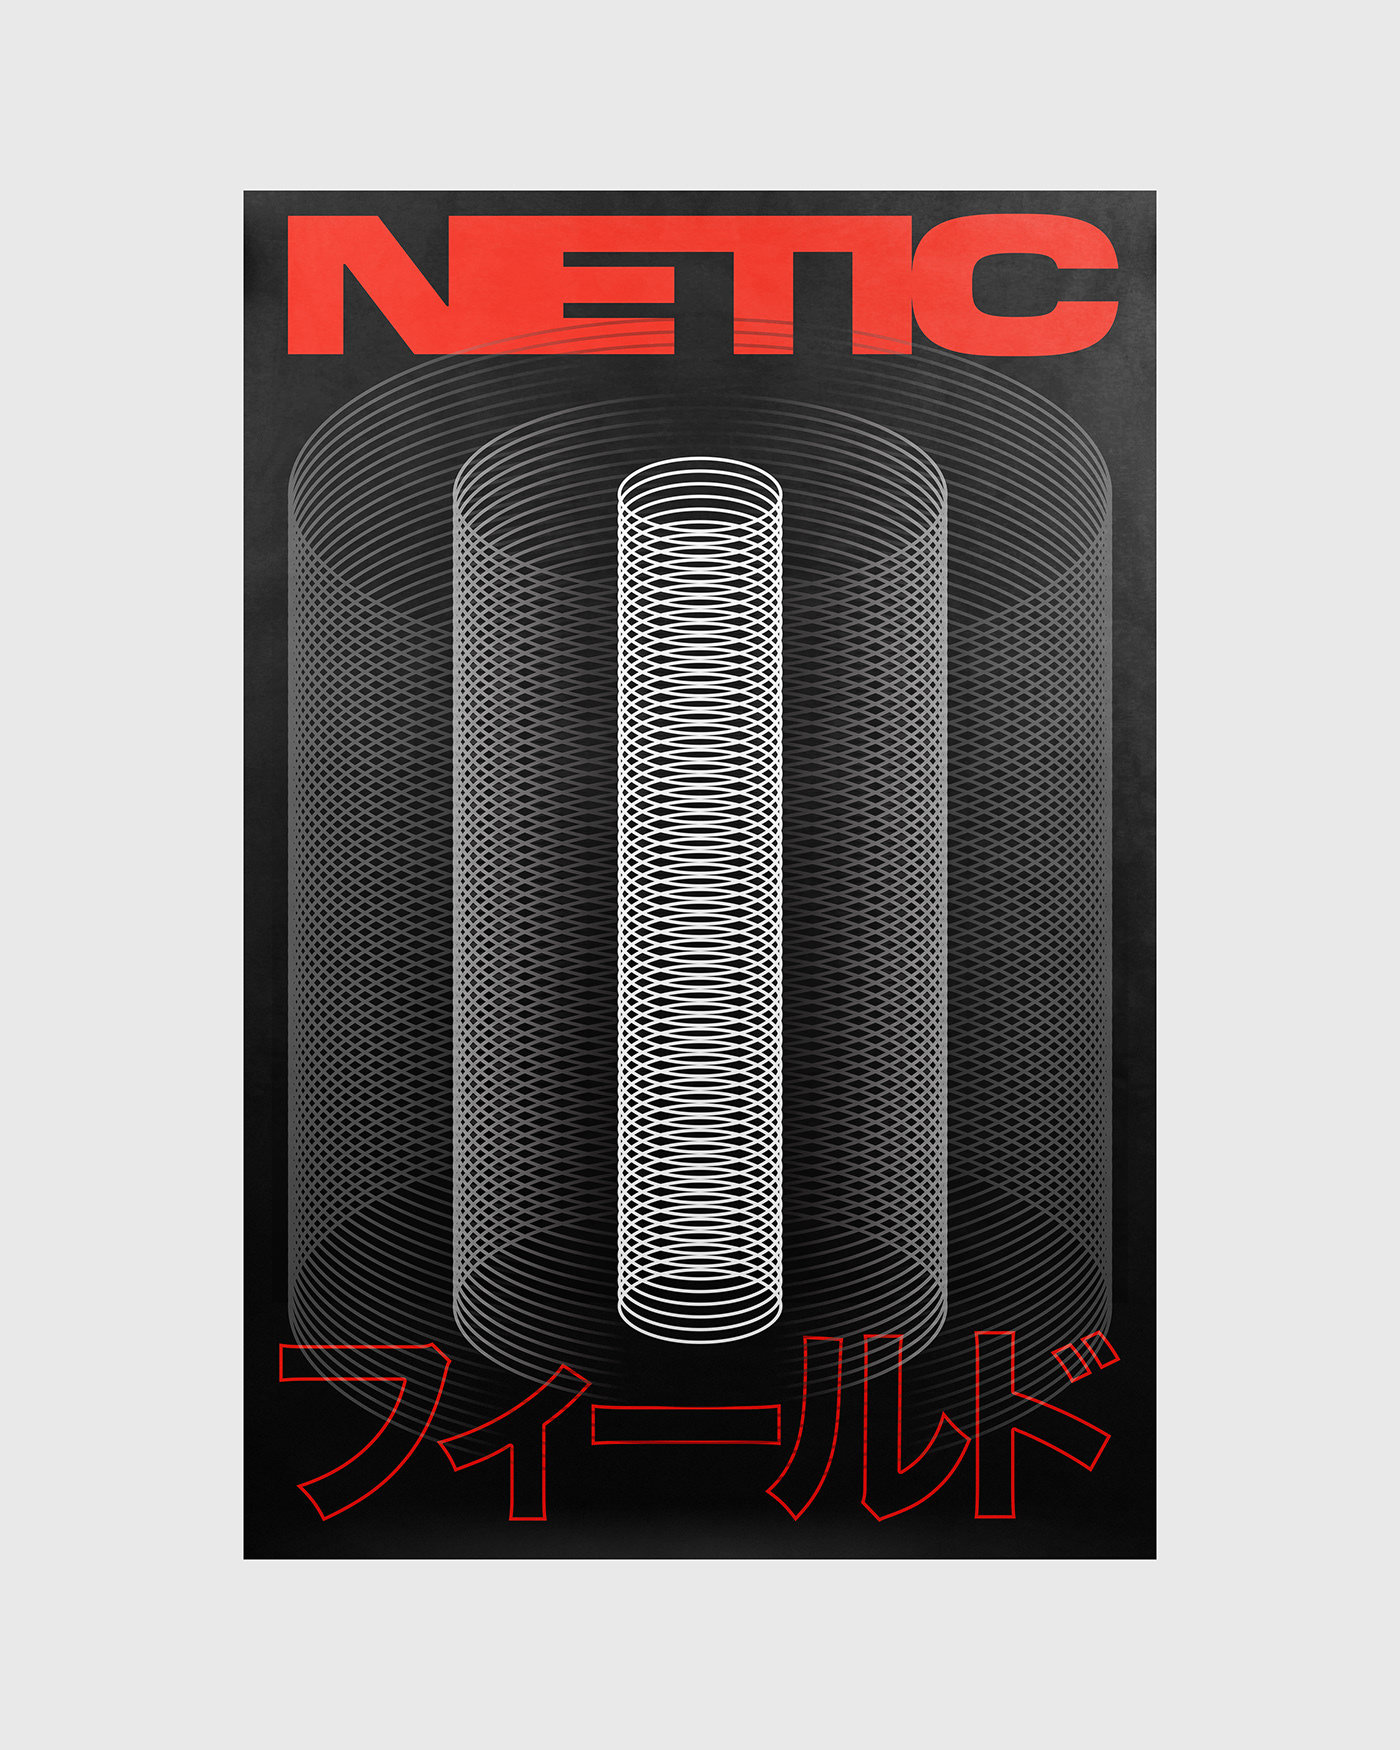 Netic poster by Xtian Miller